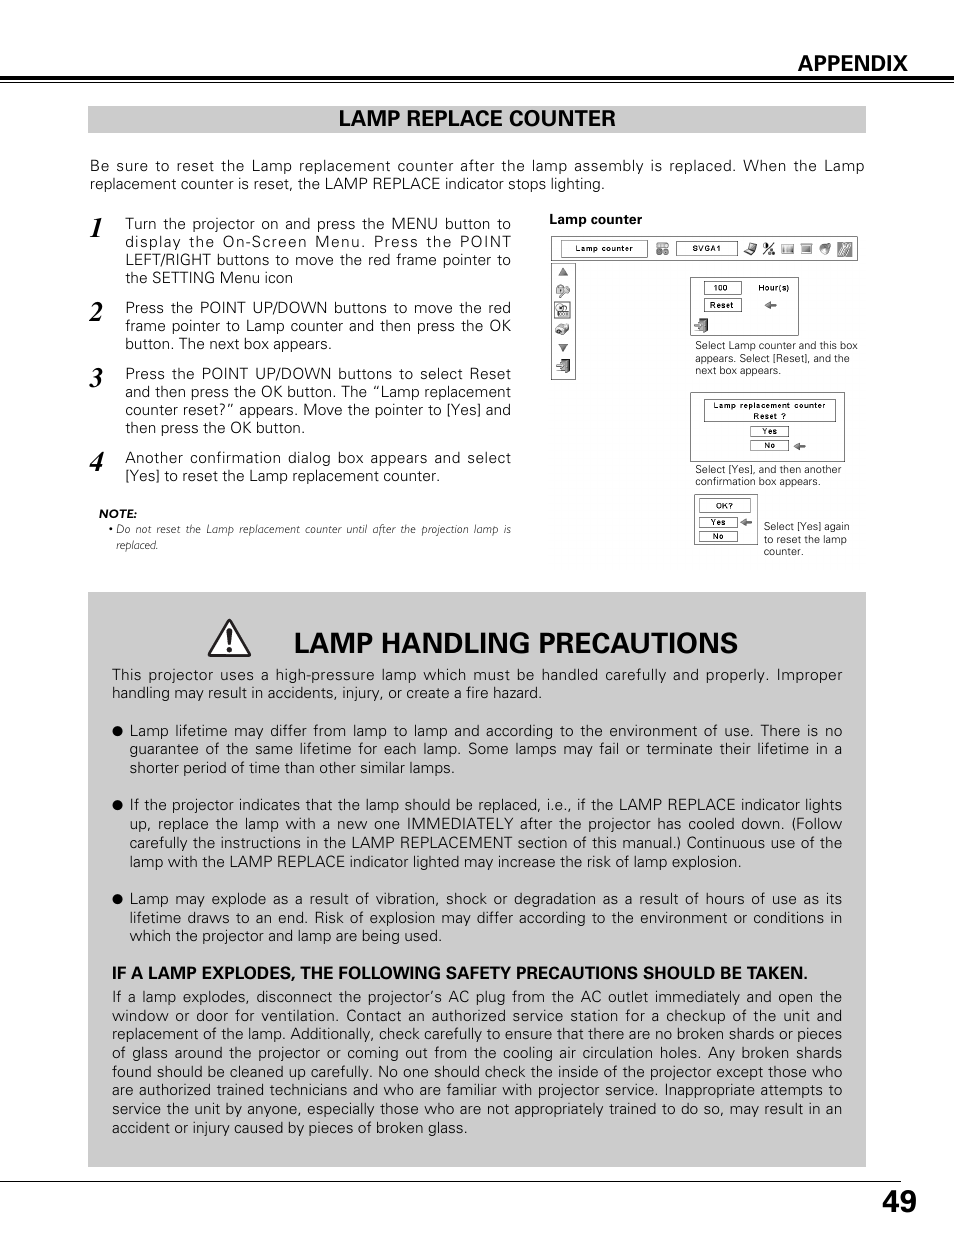 Lamp replace counter, Lamp handling precautions, Appendix lamp replace counter | Canon LV-7575 User Manual | Page 49 / 63